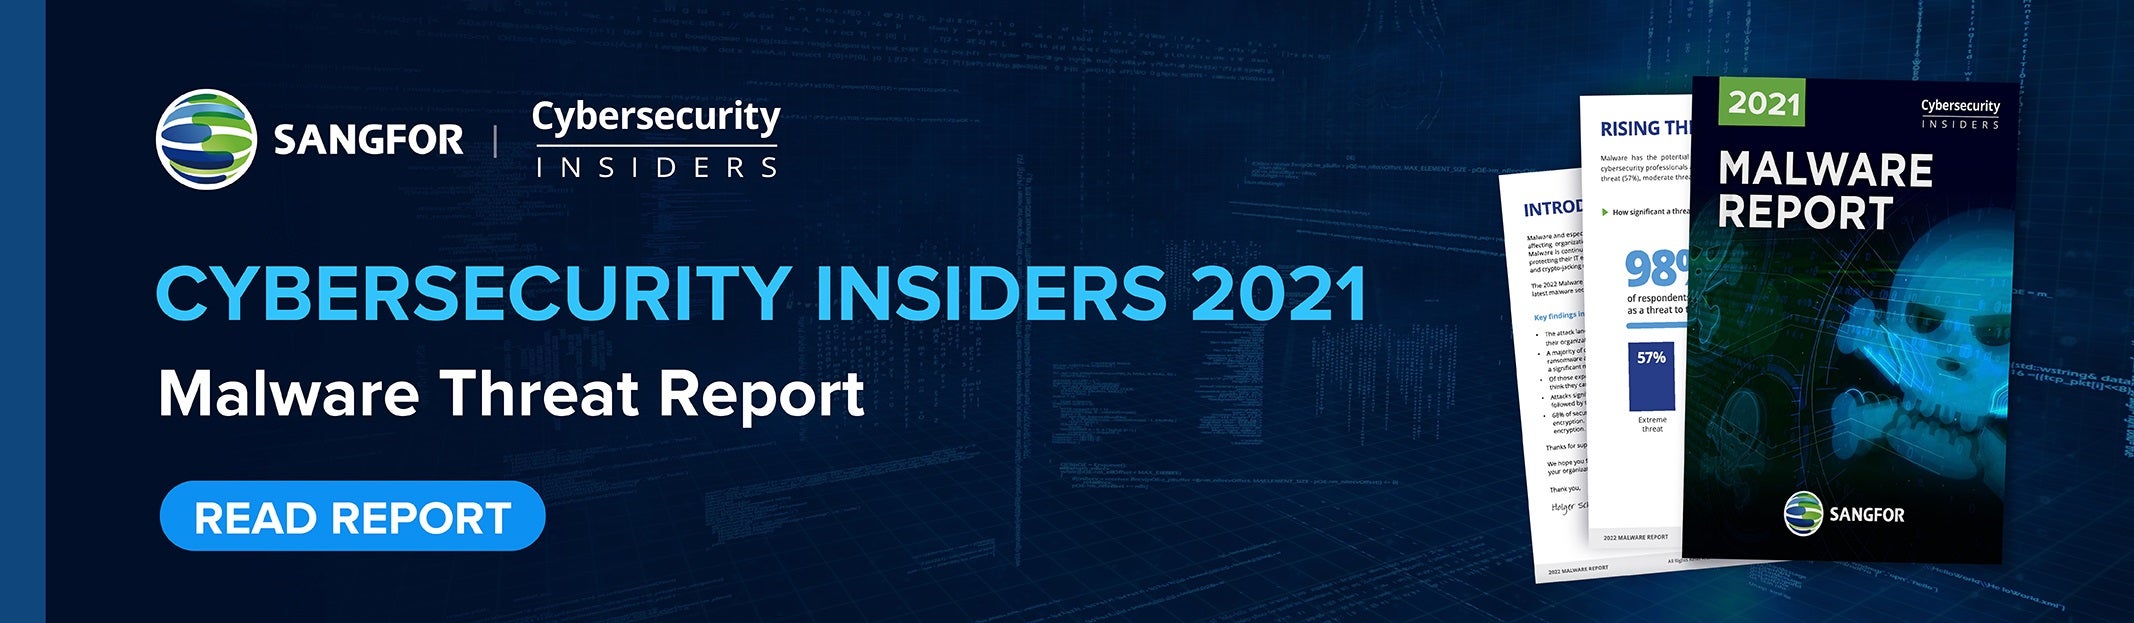 Sangfor 2021 Malware Report with Cybersecurity Insiders article